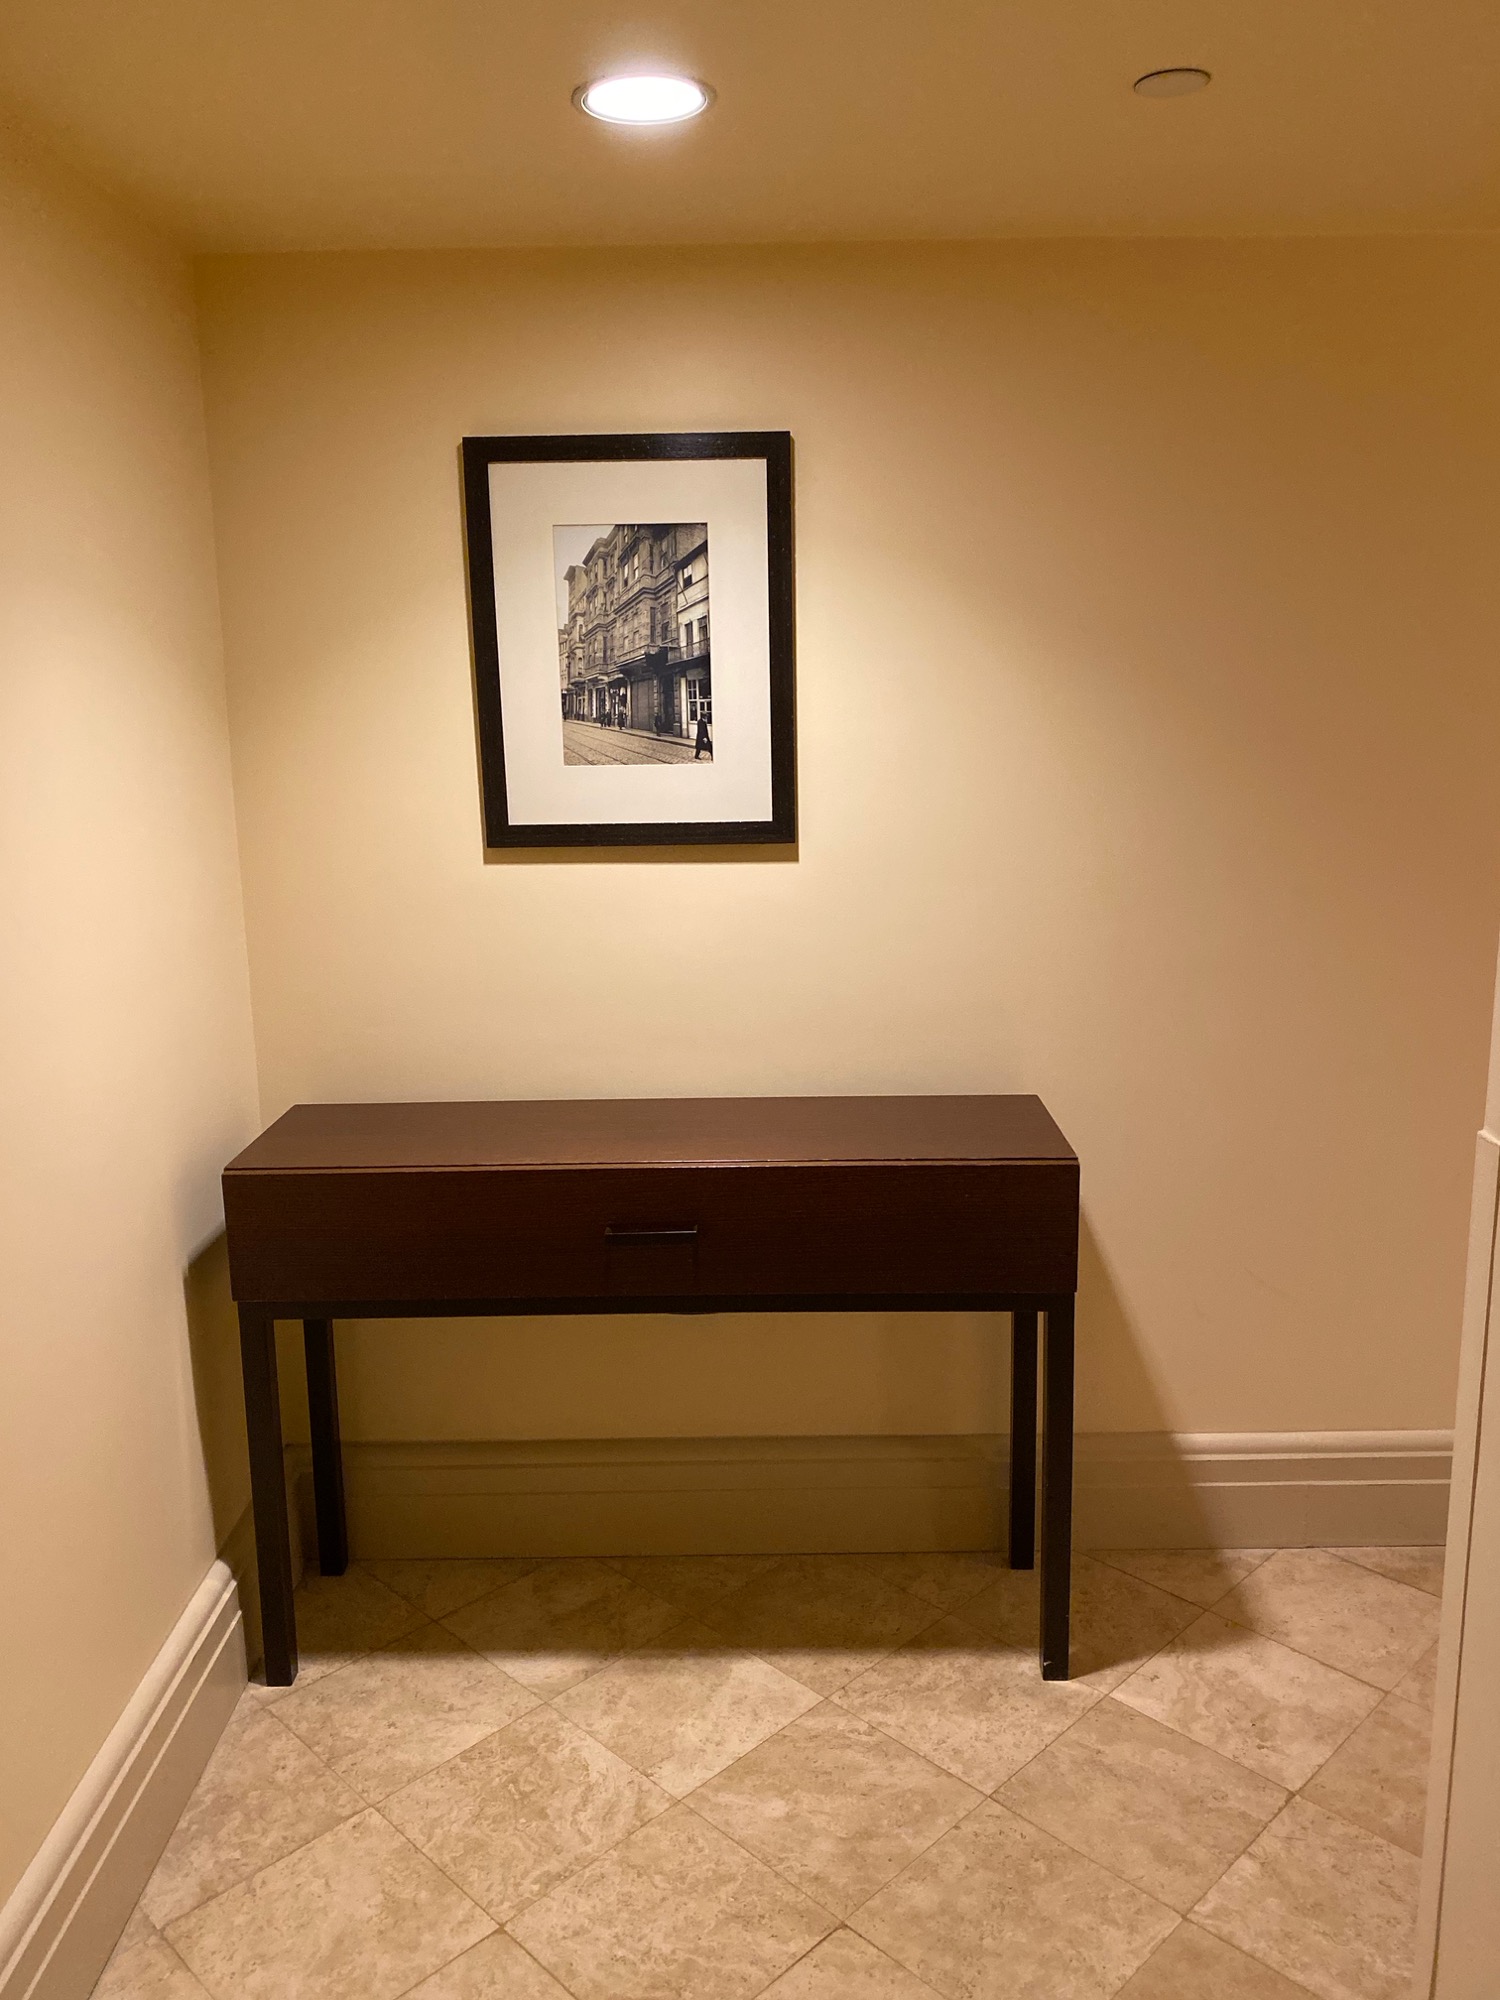 a table and a framed picture on the wall